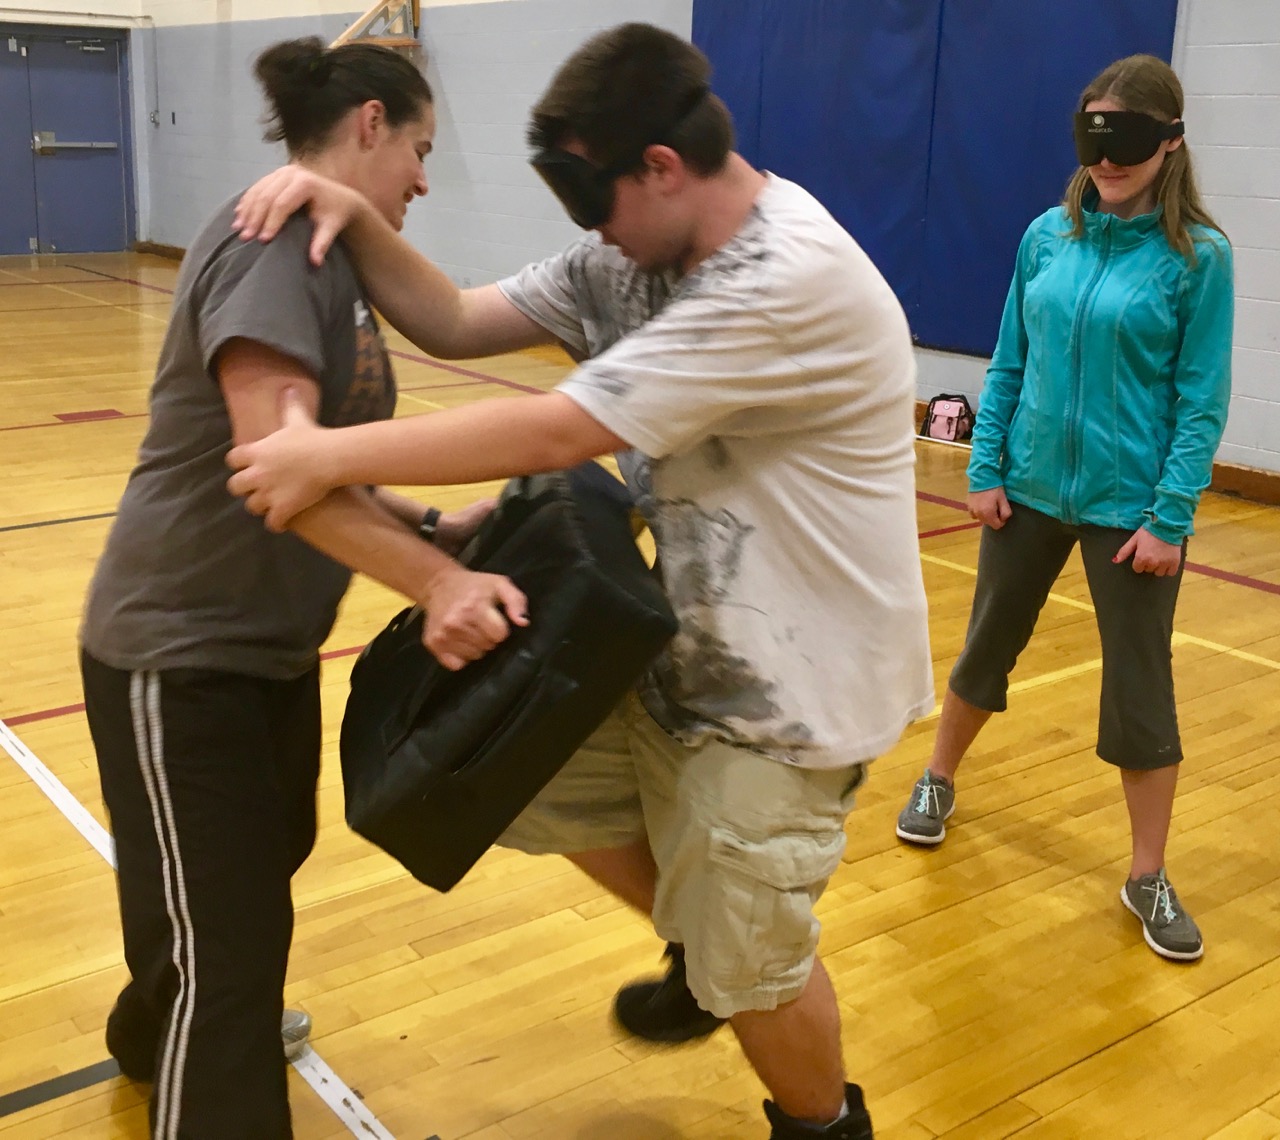 Masson learns how to put power in forward knee strikes while Rachael holds the pad. Maggie waits her turn to give it a try